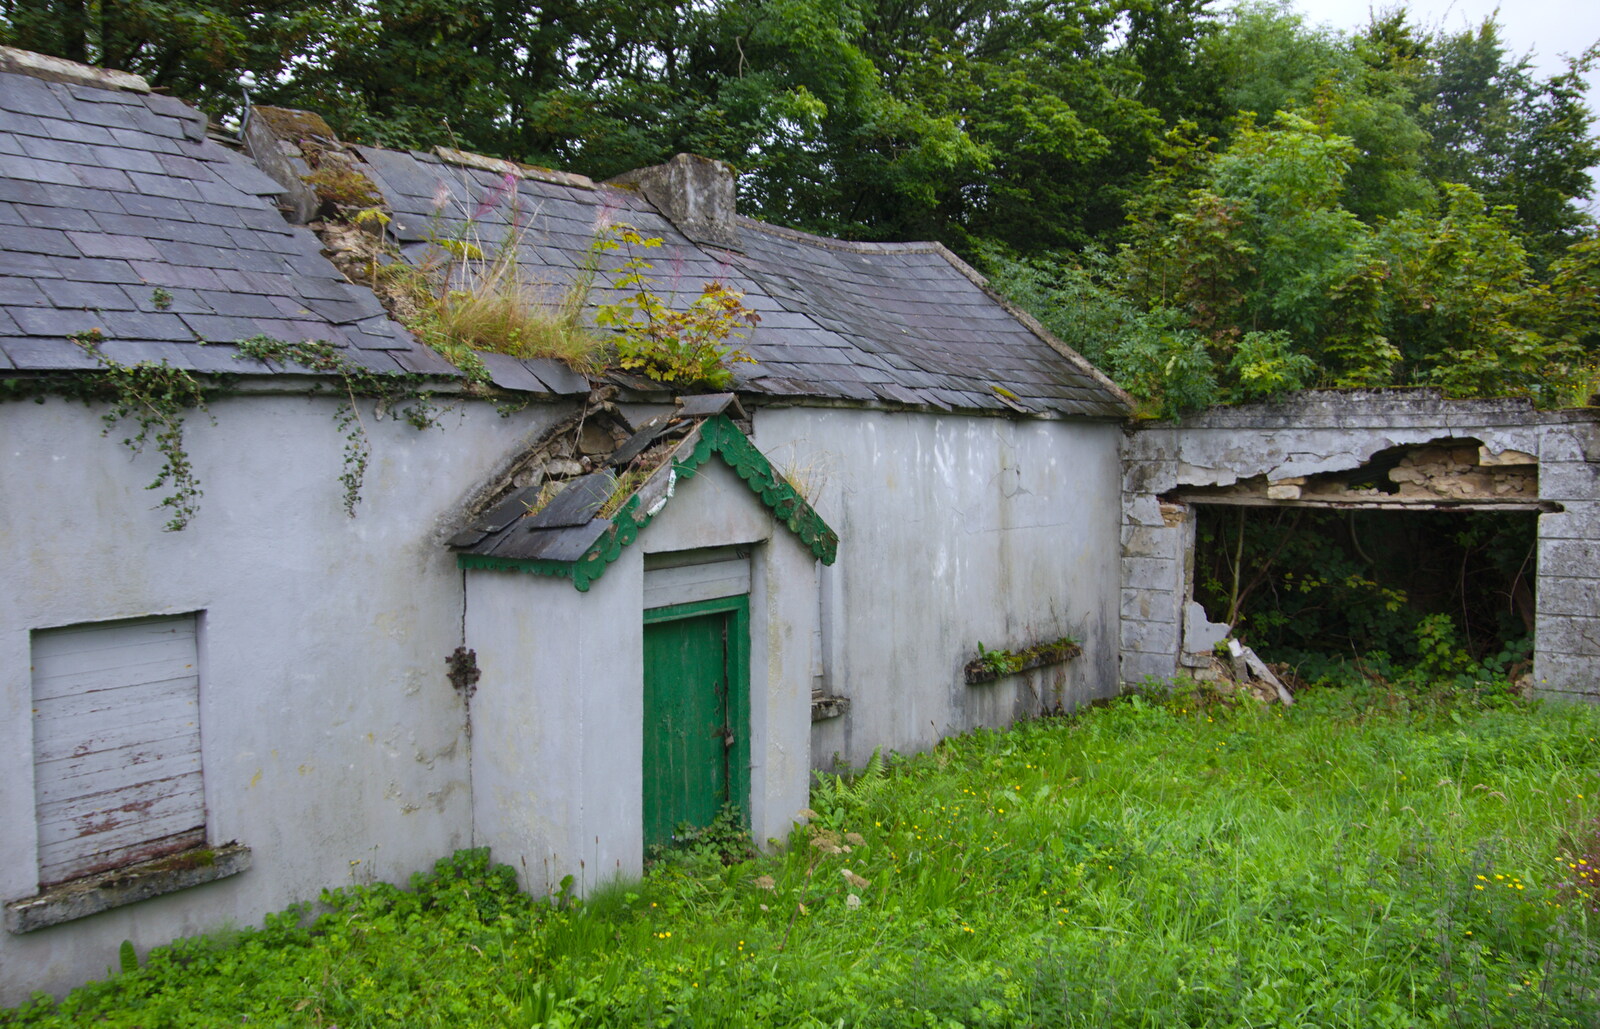 Another derelict house in Glenfarne from Travels in the Borderlands: An Blaic/Blacklion to Belcoo and back, Cavan and Fermanagh, Ireland - 22nd August 2019